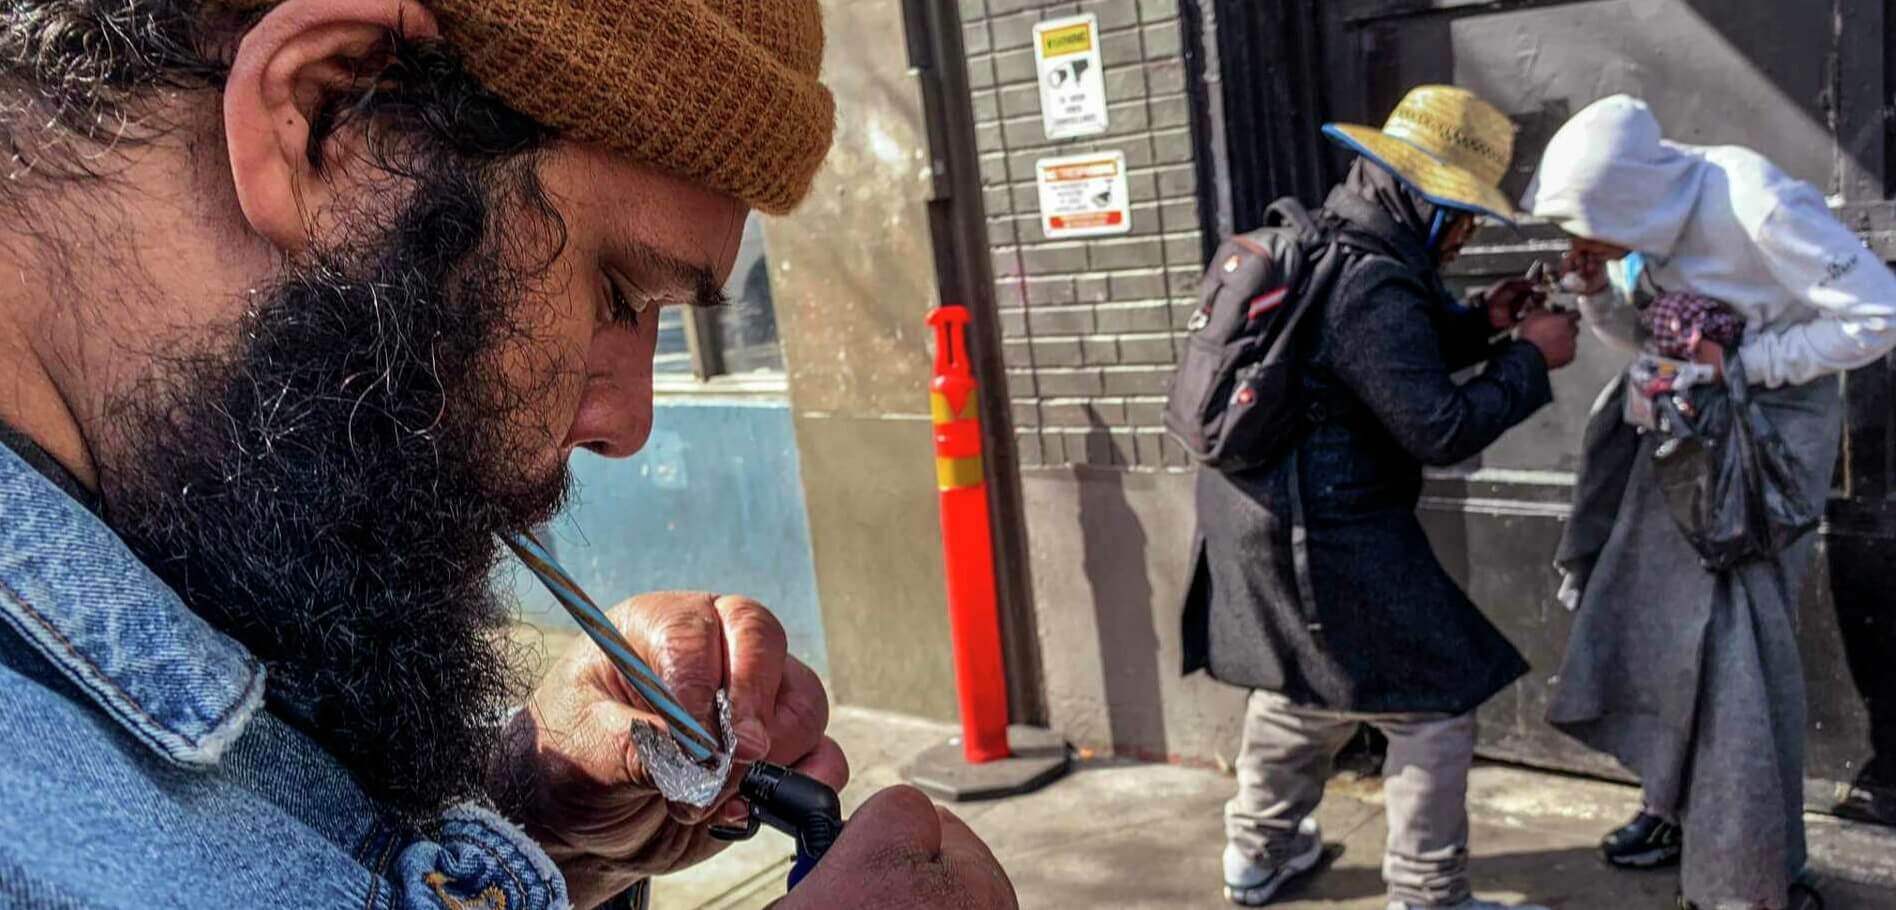 A man smoke from a pipe on public street outside